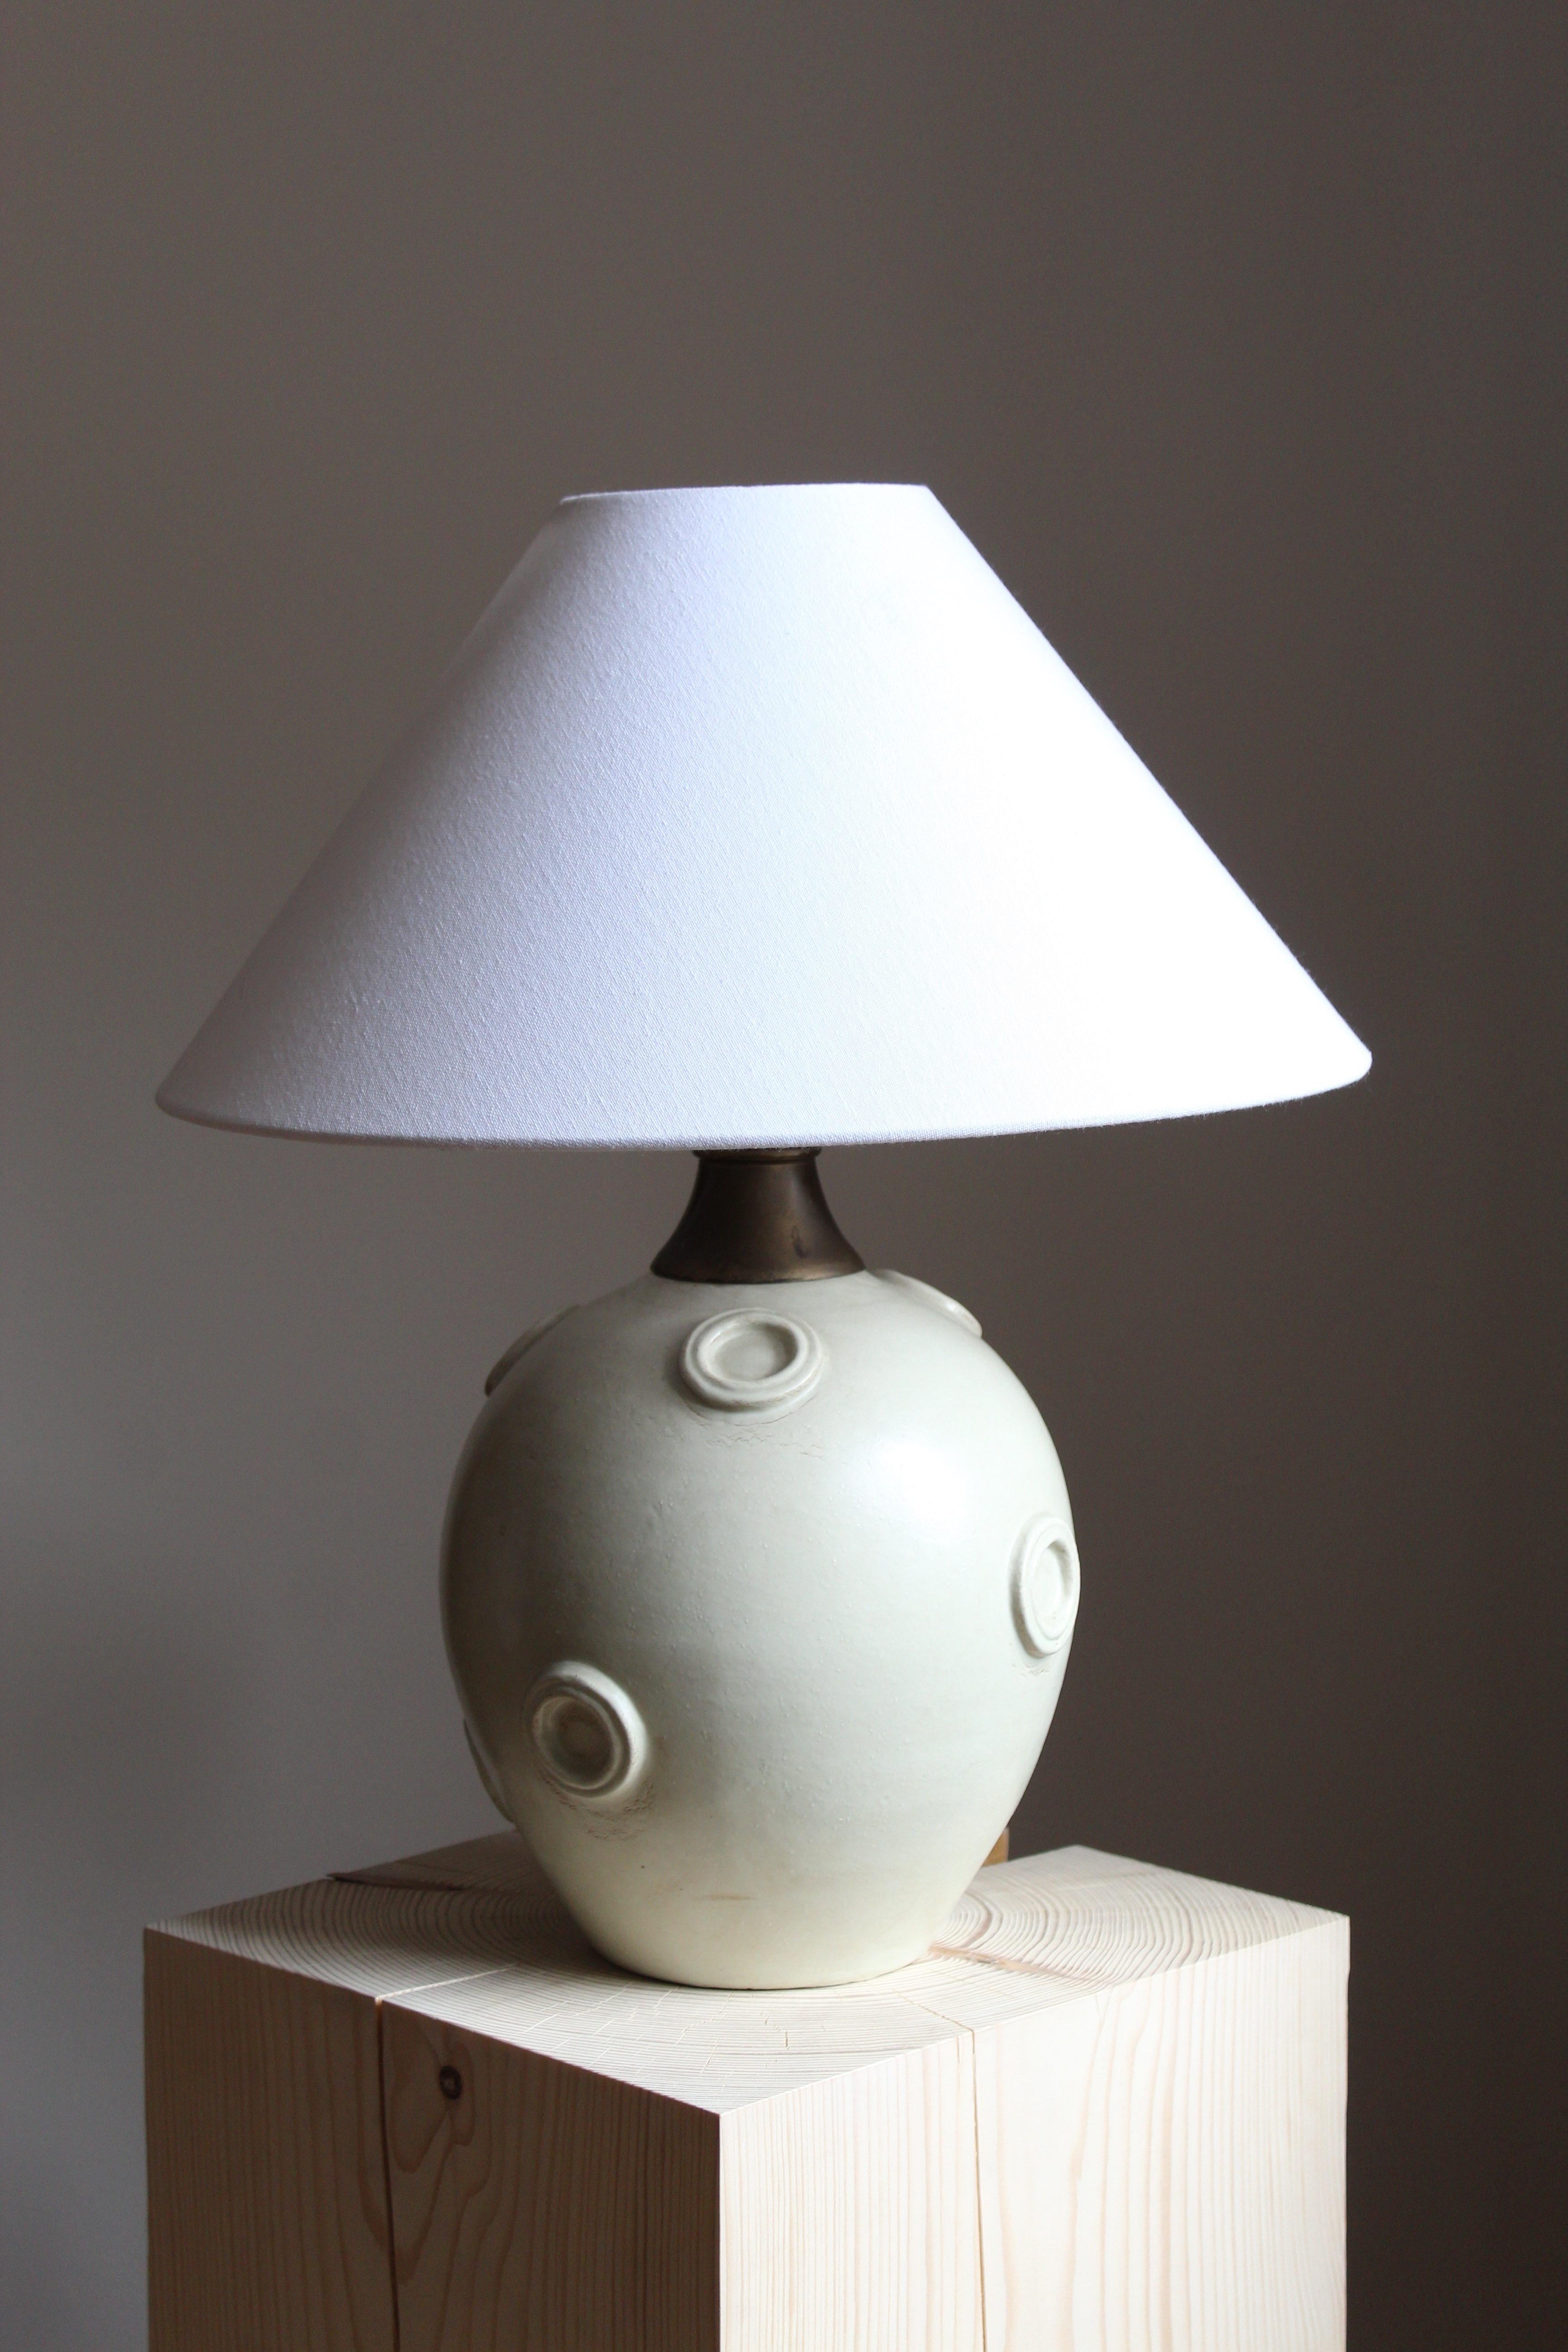 A large modernist table lamp designed by Jerk Werkmäster. Produced by Nittsjö, Sweden, 1930s. Stamped.

Sold without lampshade. Stated dimensions exclude the lampshade.

Glaze features a white-grey color.

Other designers of the period include Axel